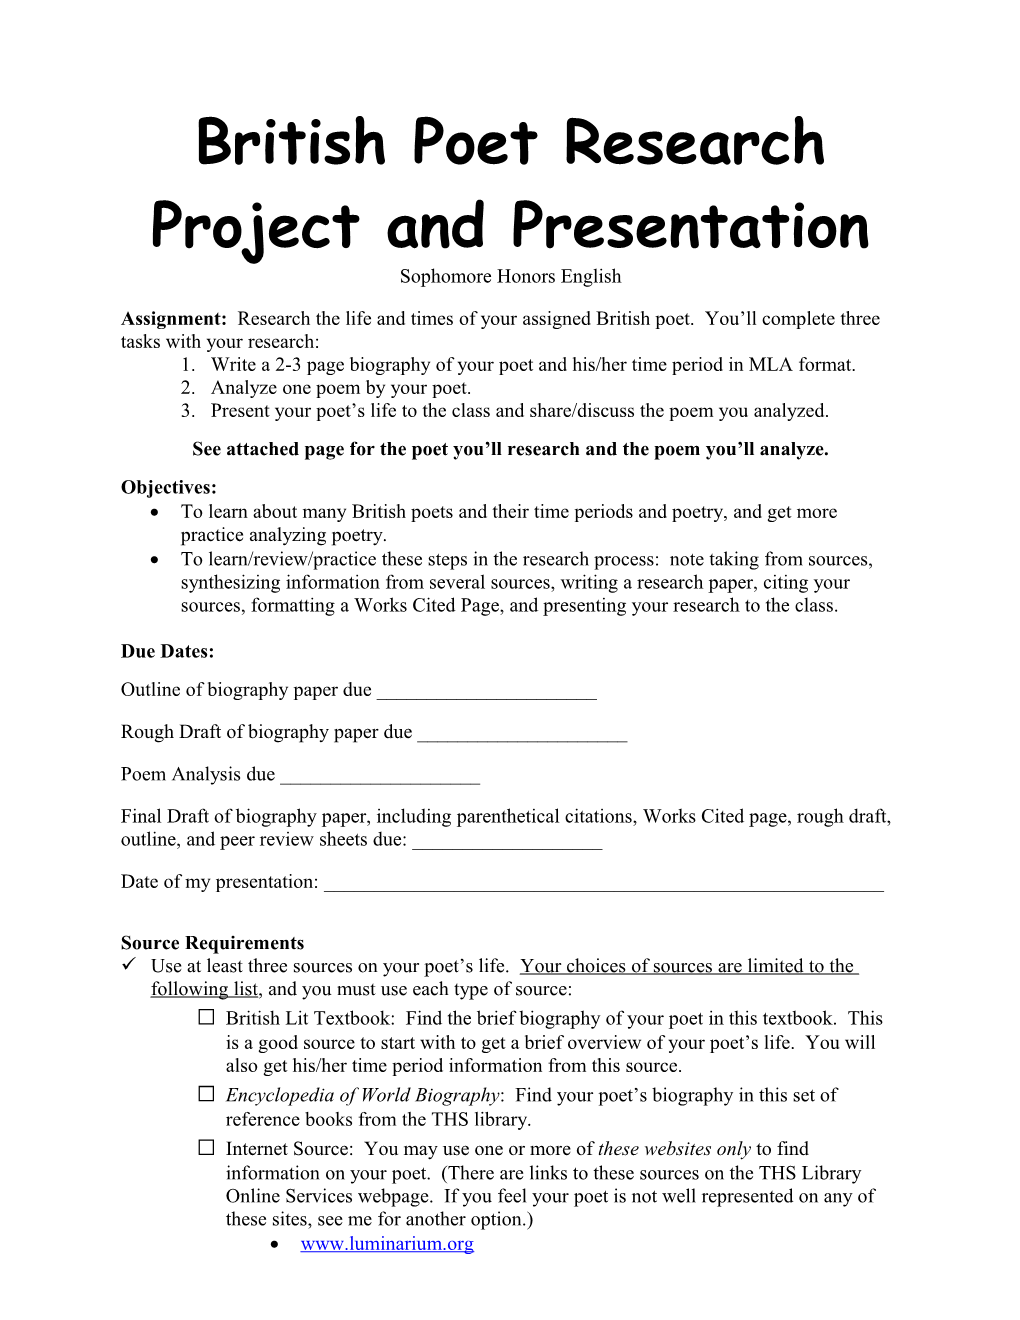 British Poet Research Project and Presentation